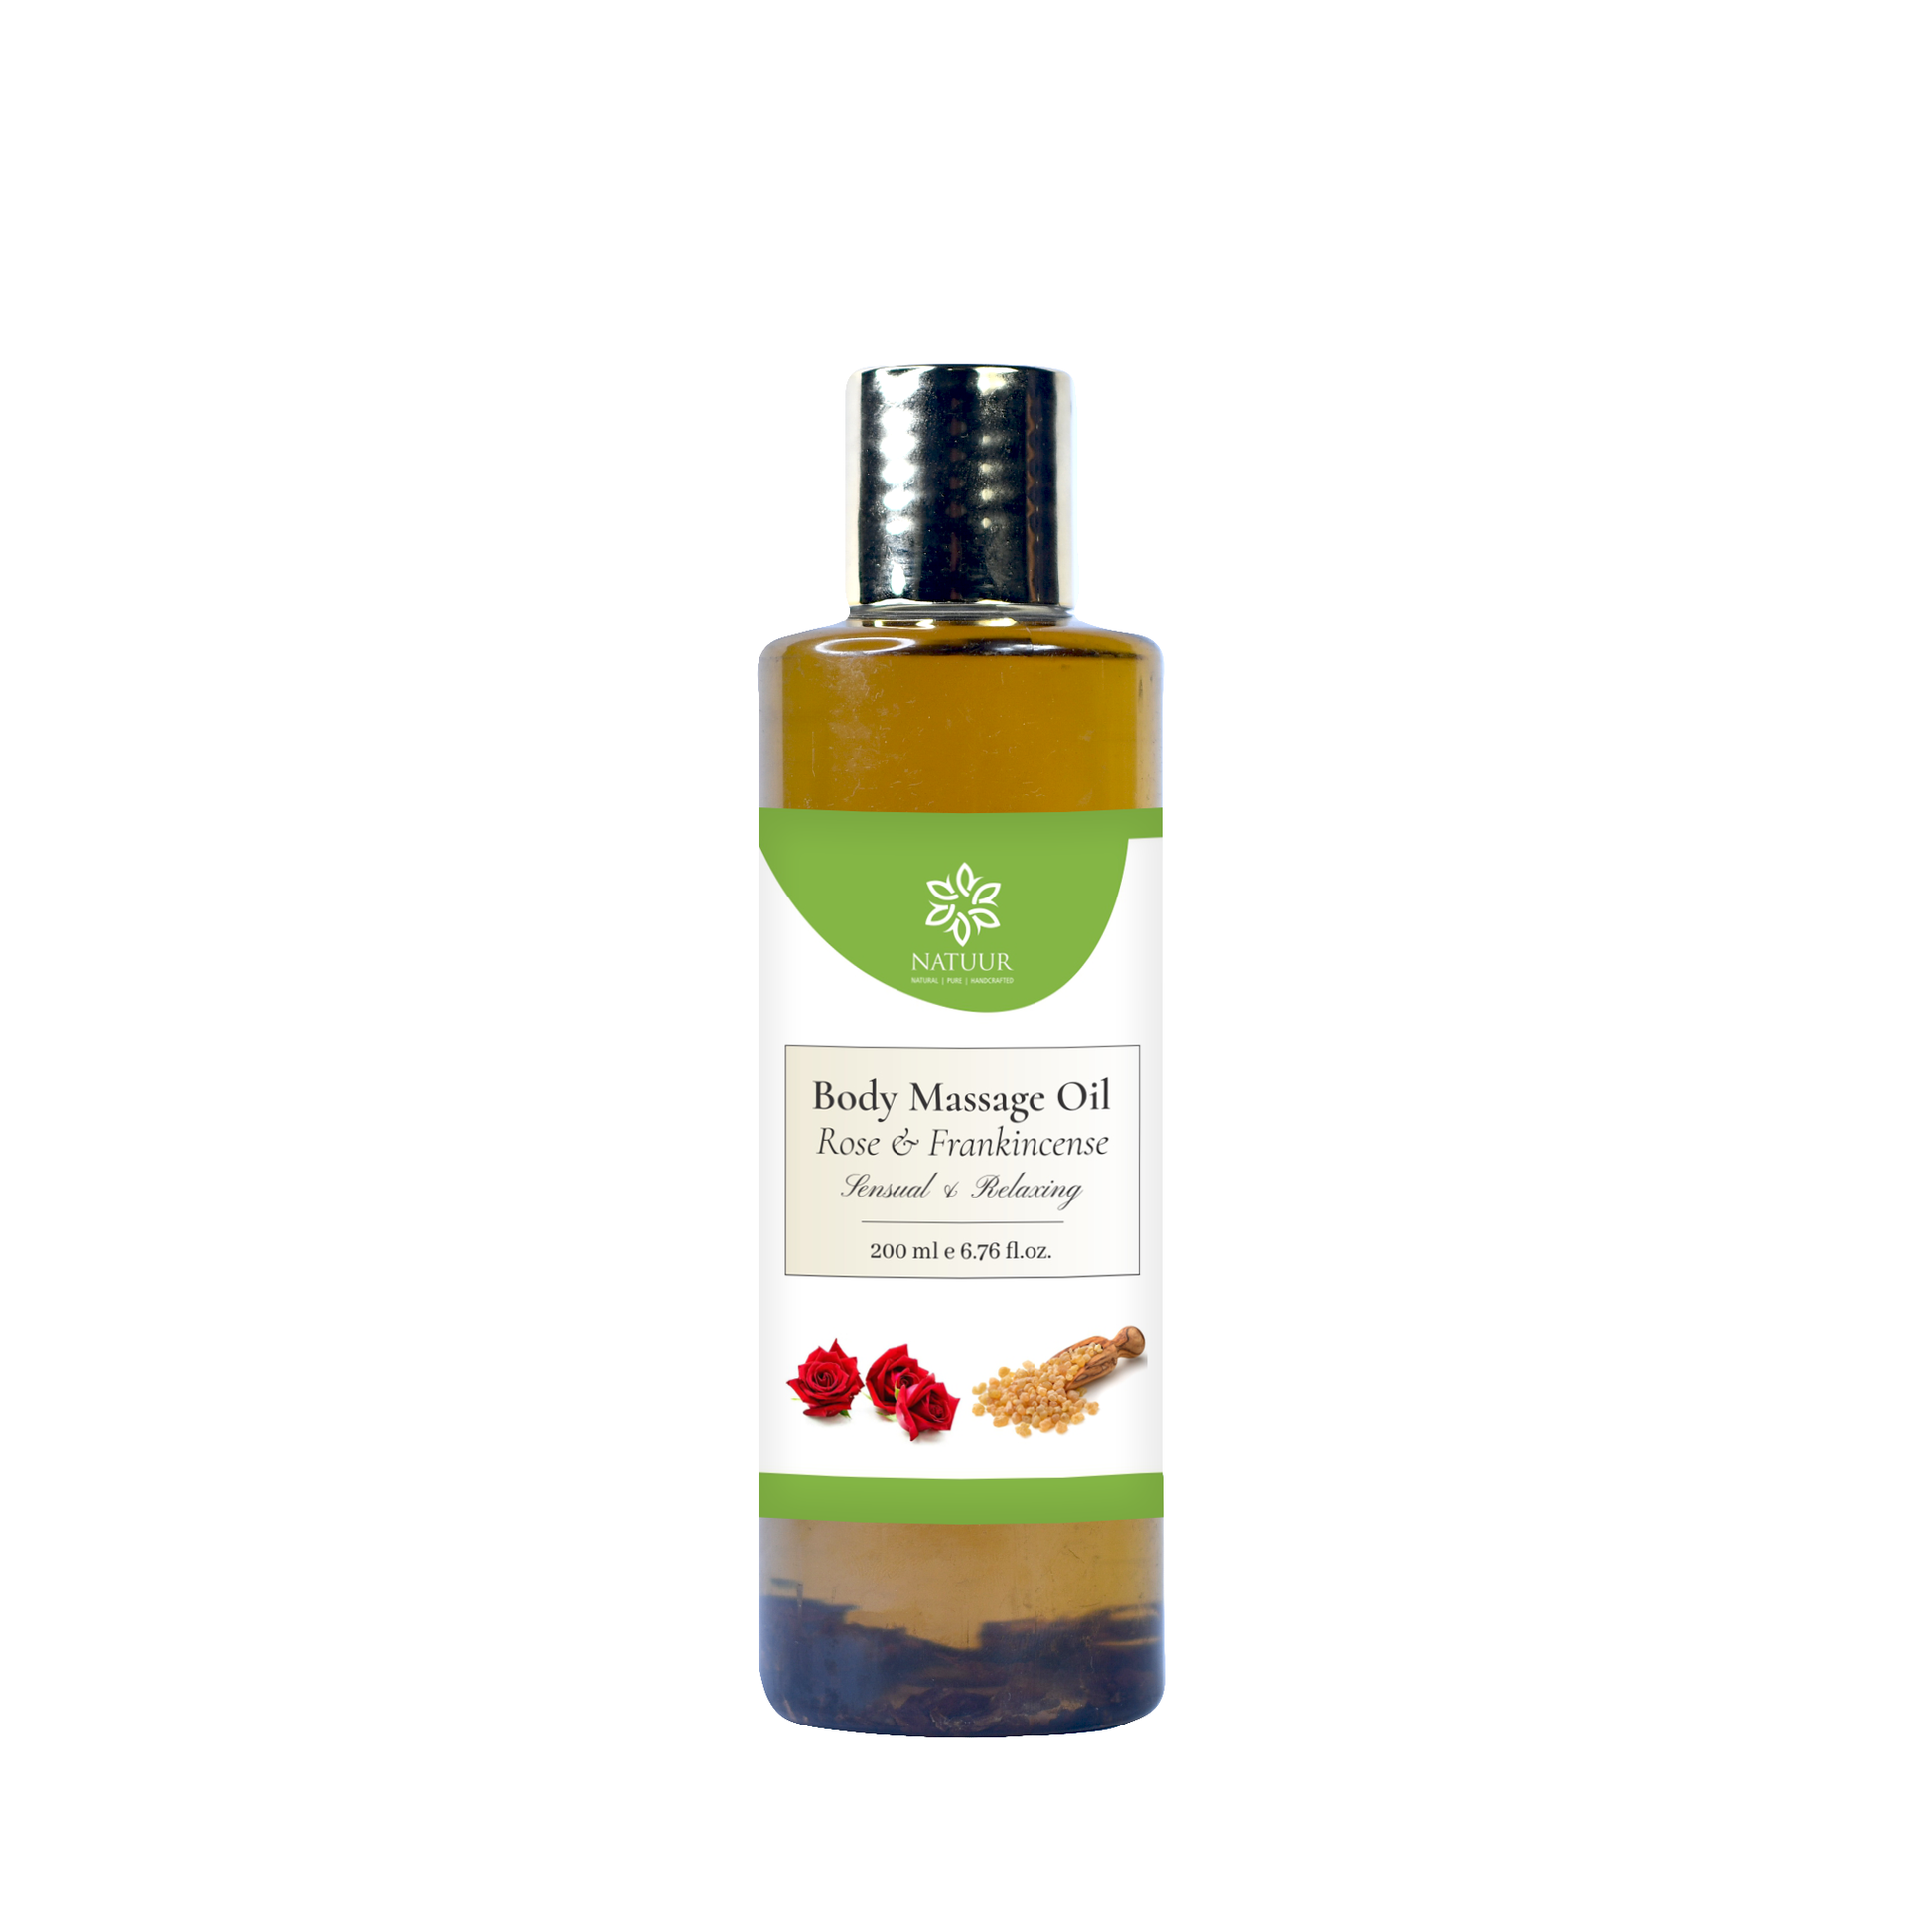 Body Massage oil Rose & Frankinscense - Sensual and relaxing - Natuur.in